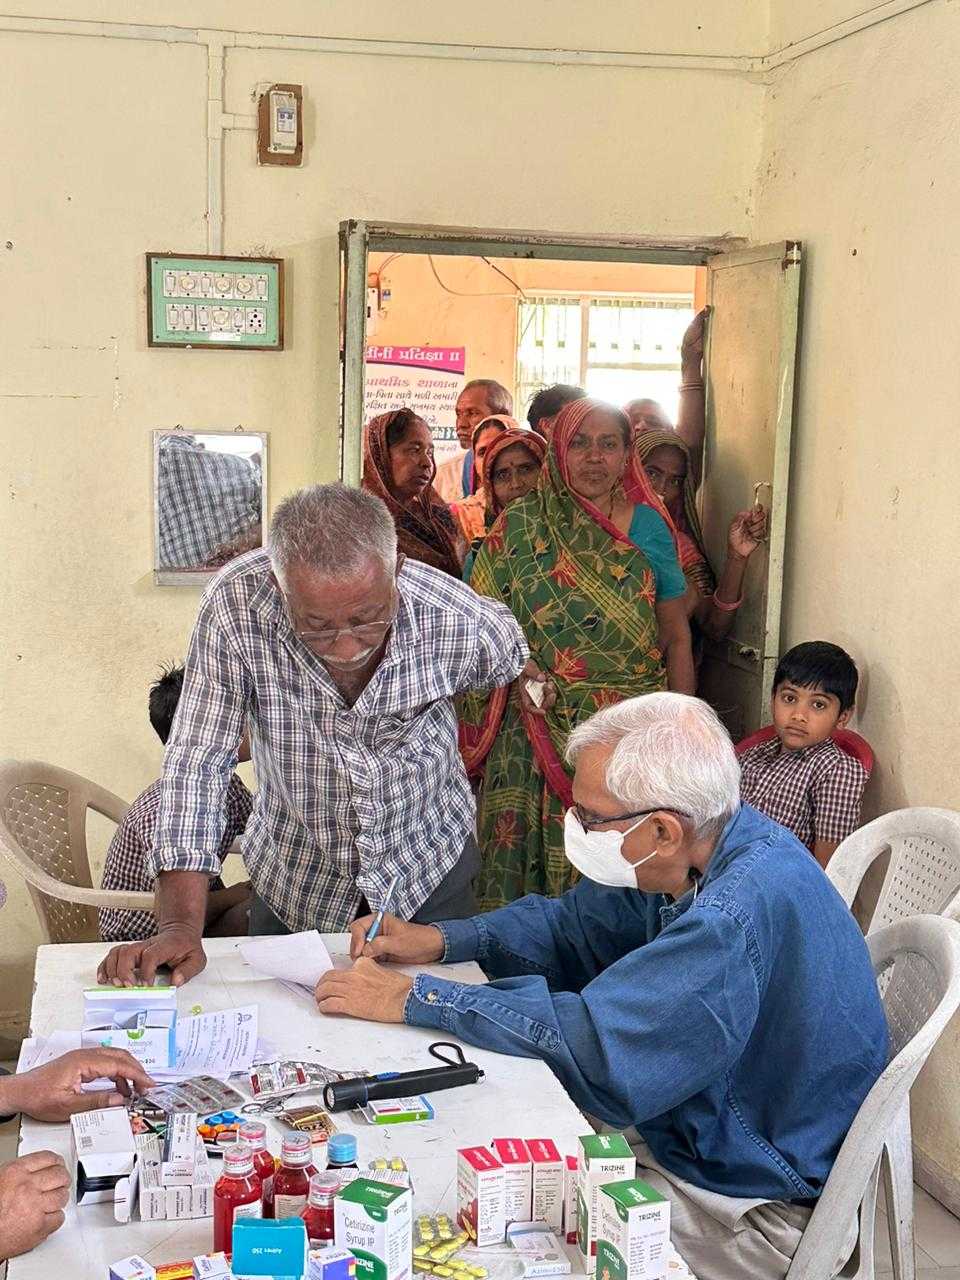  14th March 2023 Diagnostic Health check-up camp at village Hebatpur taluka Dasada, Gujarat.
A total of 80 villagers (Males 38 Females 42) turn up for check-ups of which 43 senior citizens (Males 18 Females 25) Medicines were given free. 
We have also distributed 100 steel plates to the students of primary school to eat mid-day meals. The joy of the children getting to eat on a new plate was so good to watch. 